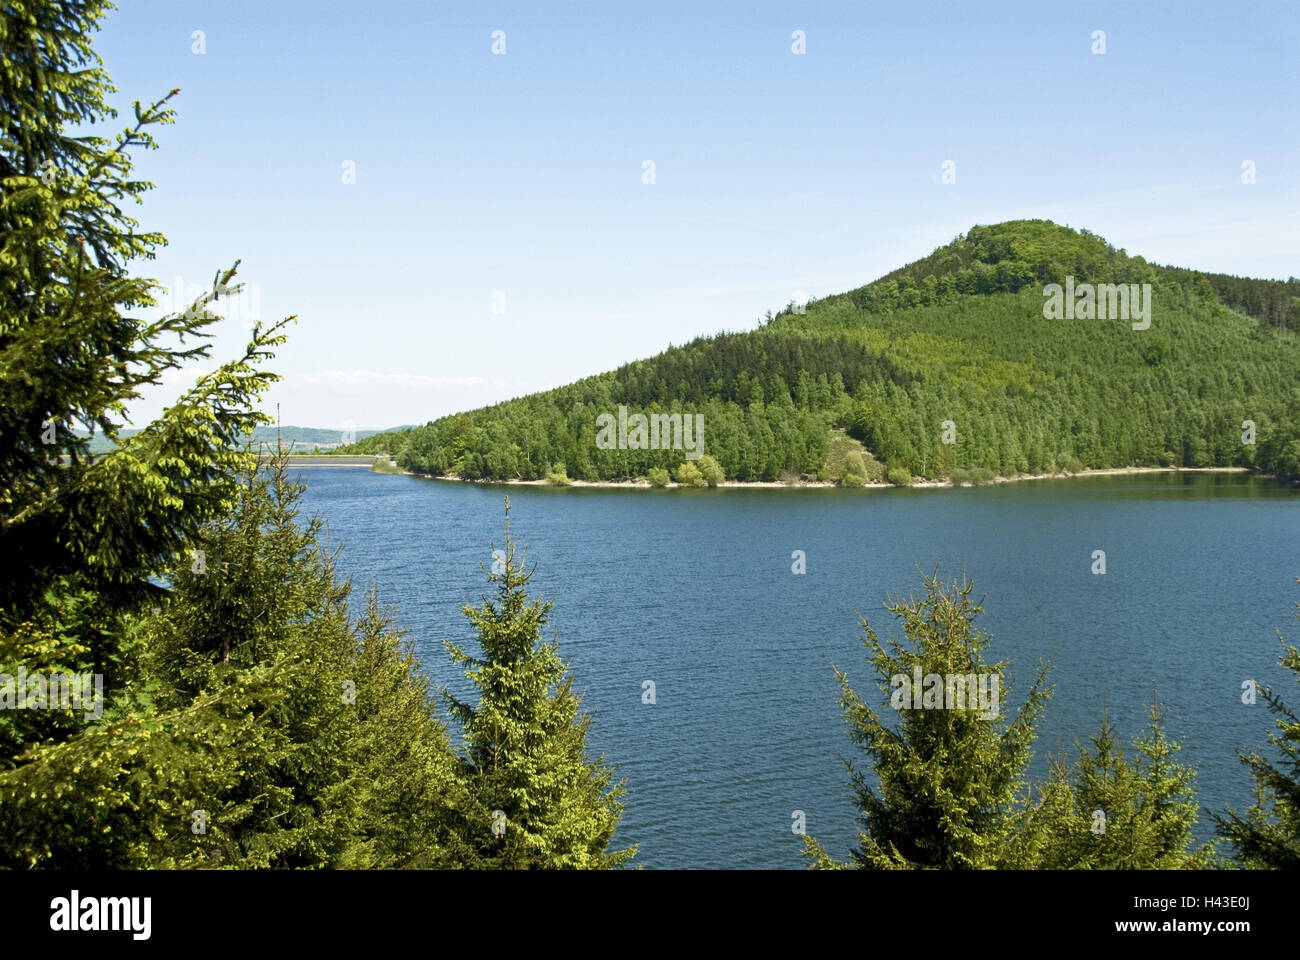 Germany, Lower Saxony, Harz, grain dam, water economy, drinking water supply, dam, water tank, water, scenery, place of interest, trees, view, Stock Photo